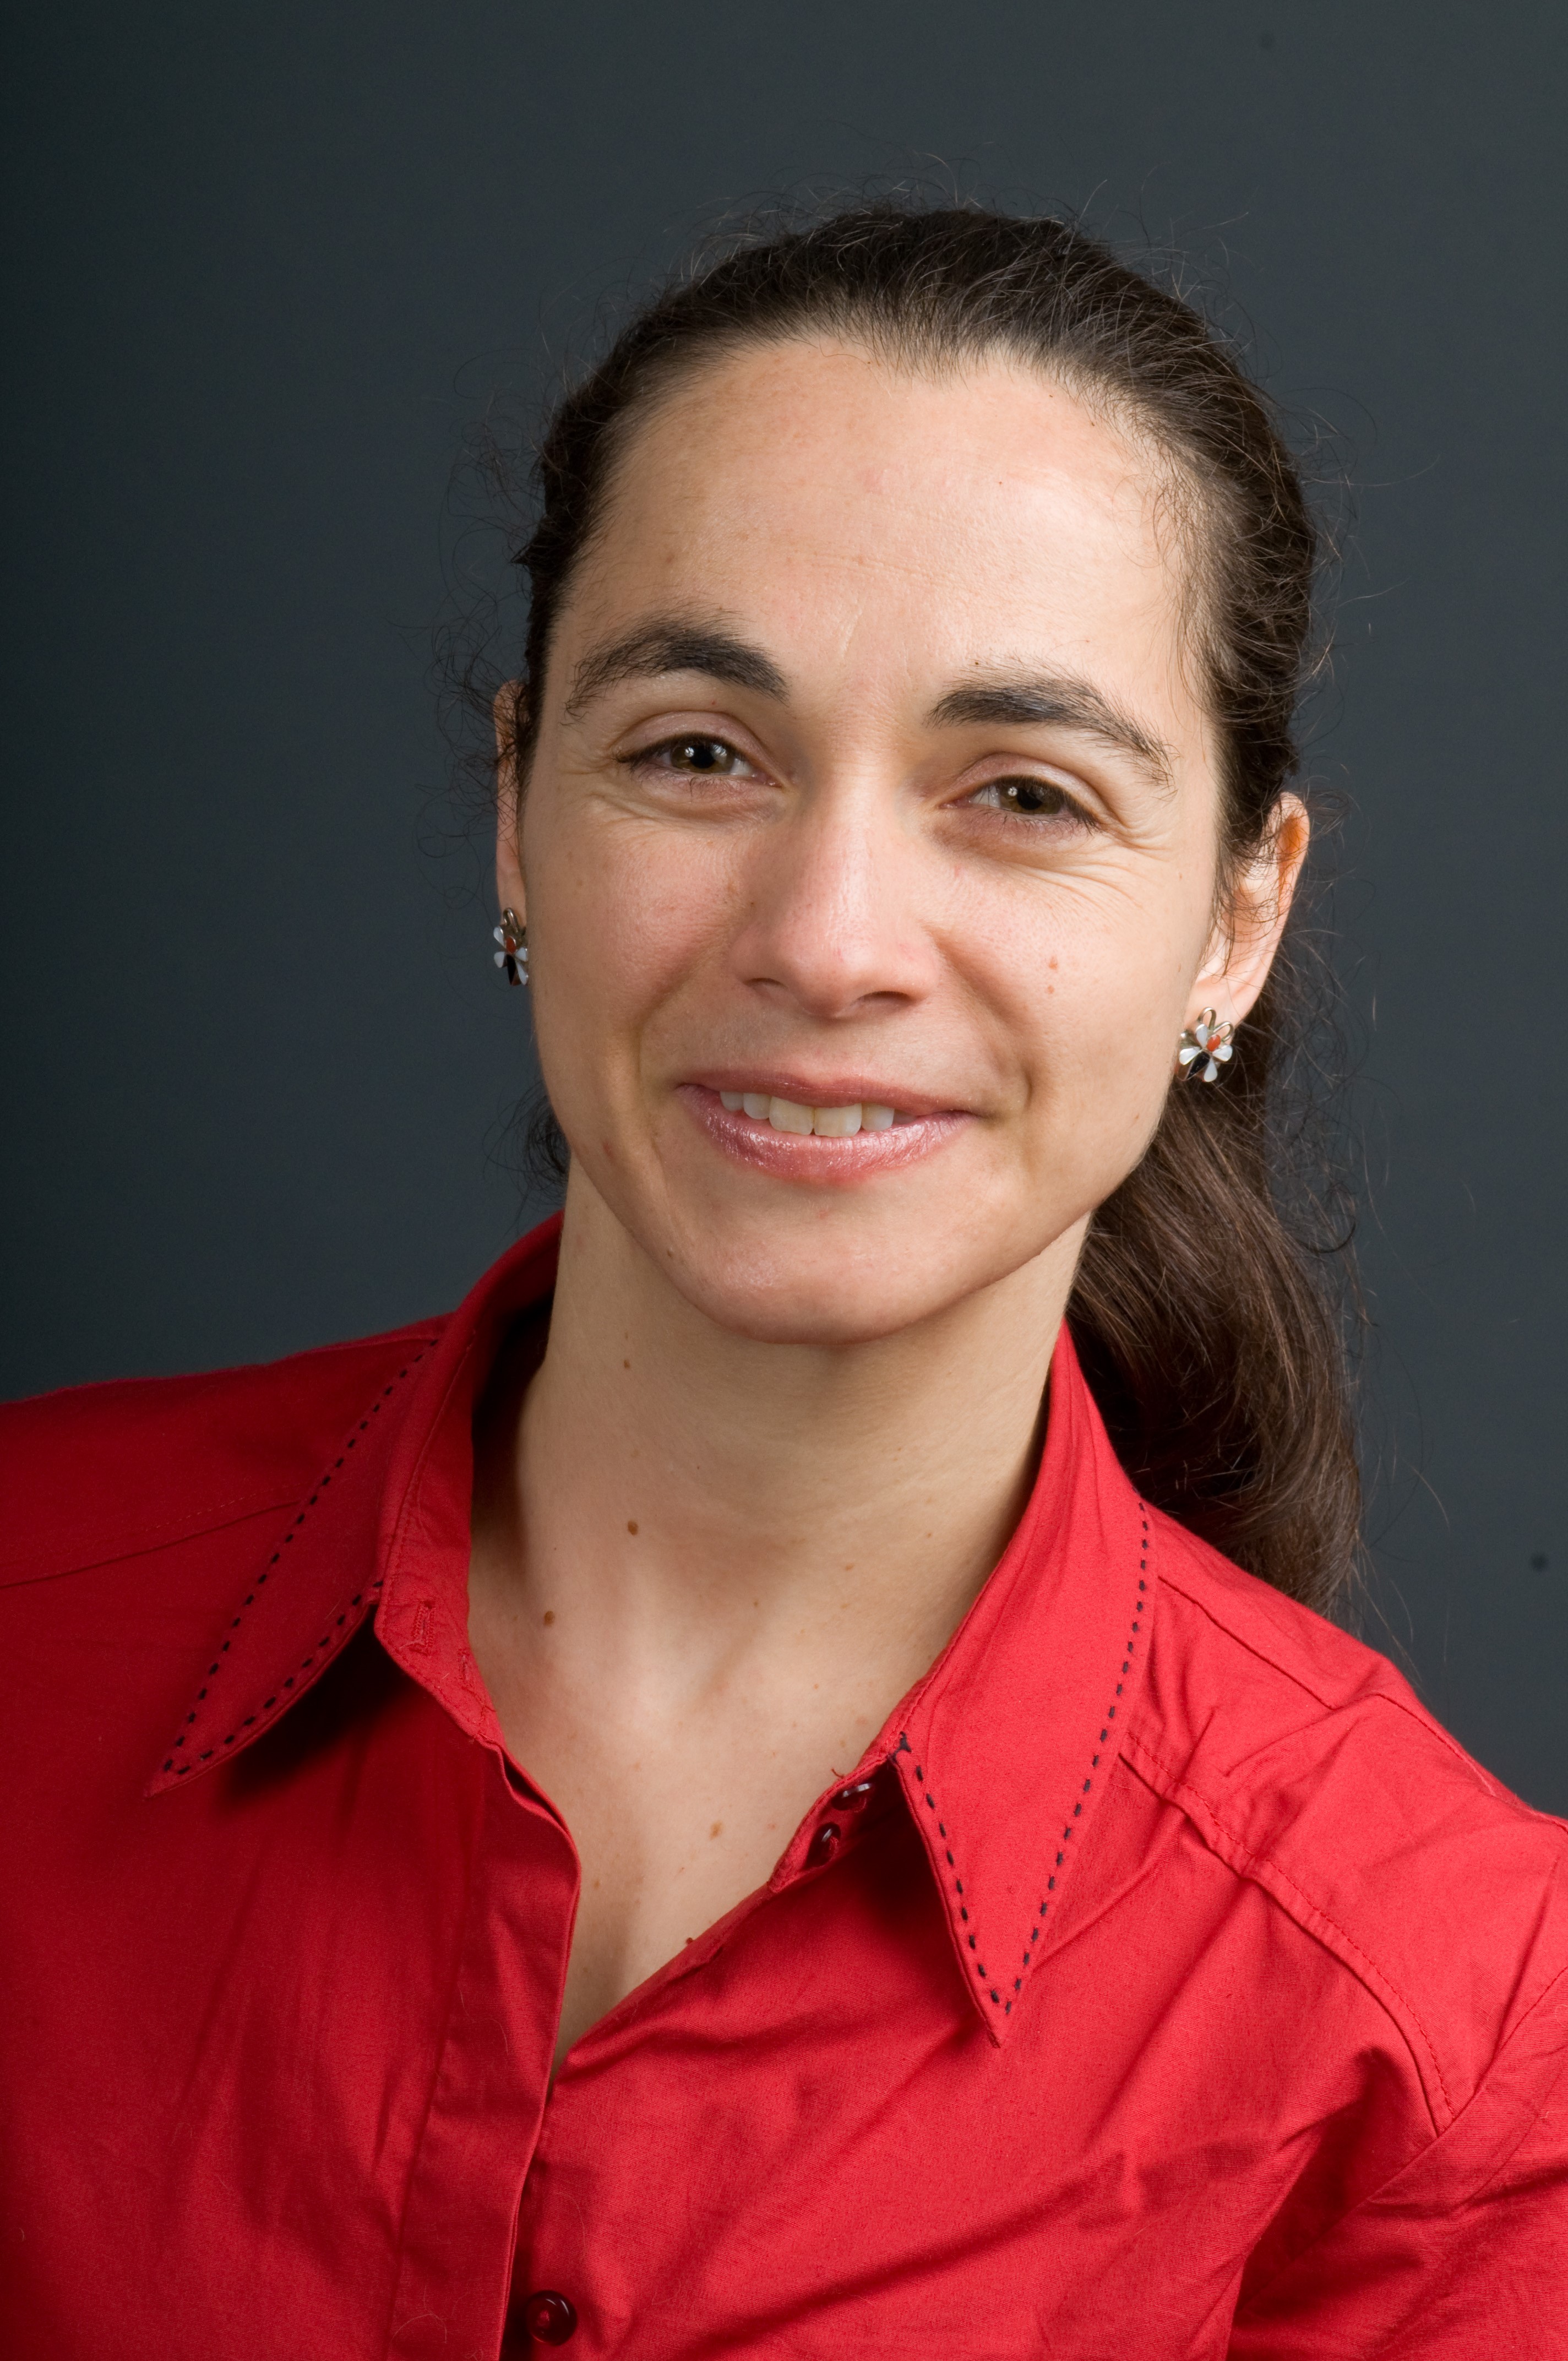 Photograph of a woman wearing a red shirt